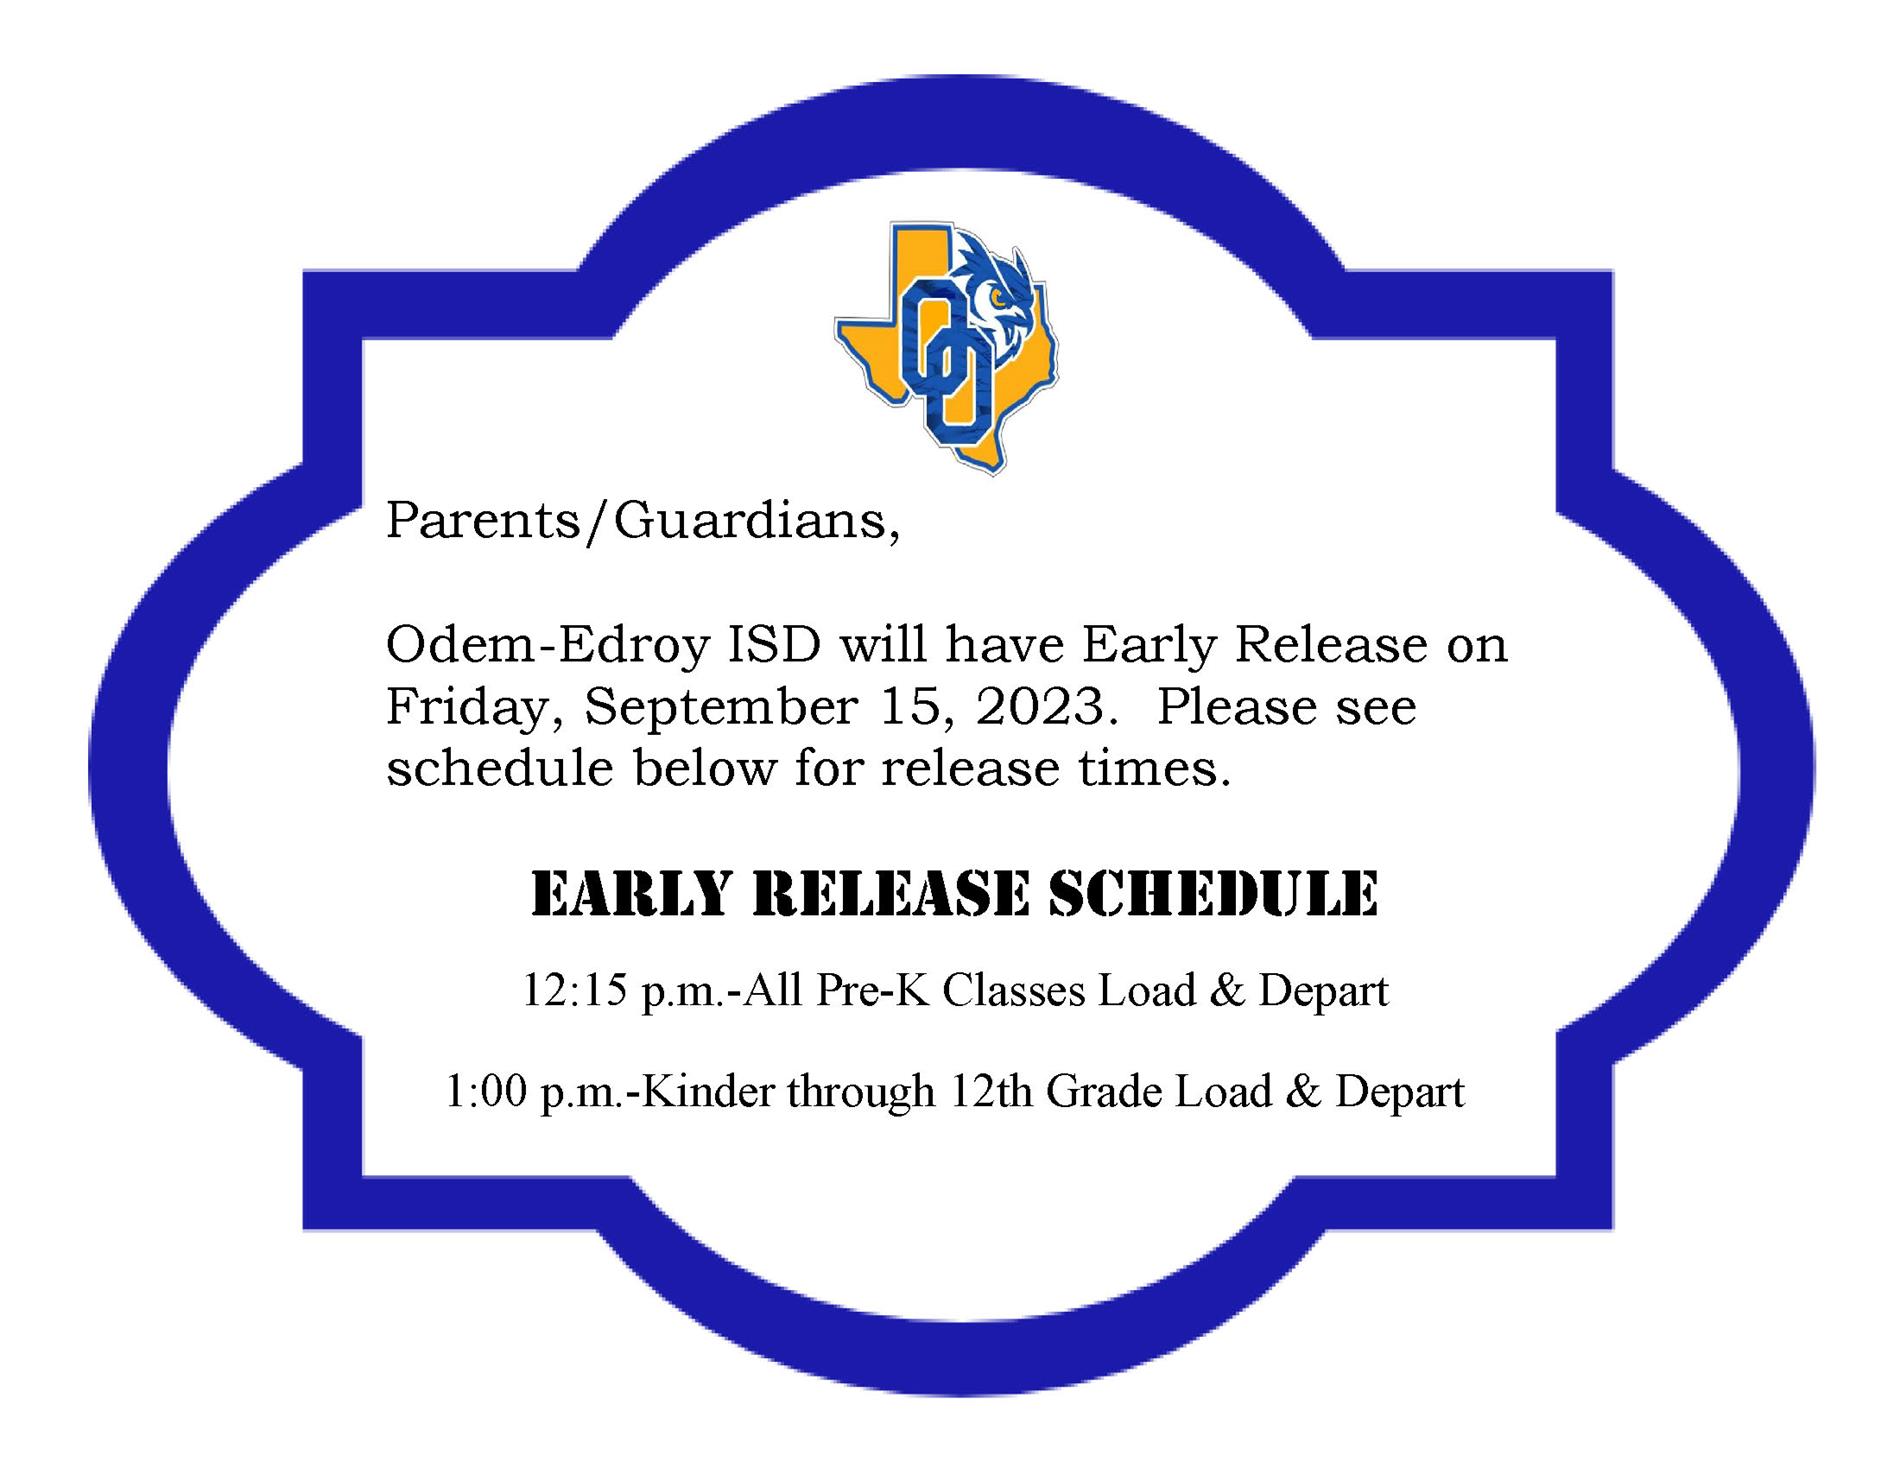 OEISD Early Release Day - September 15, 2023